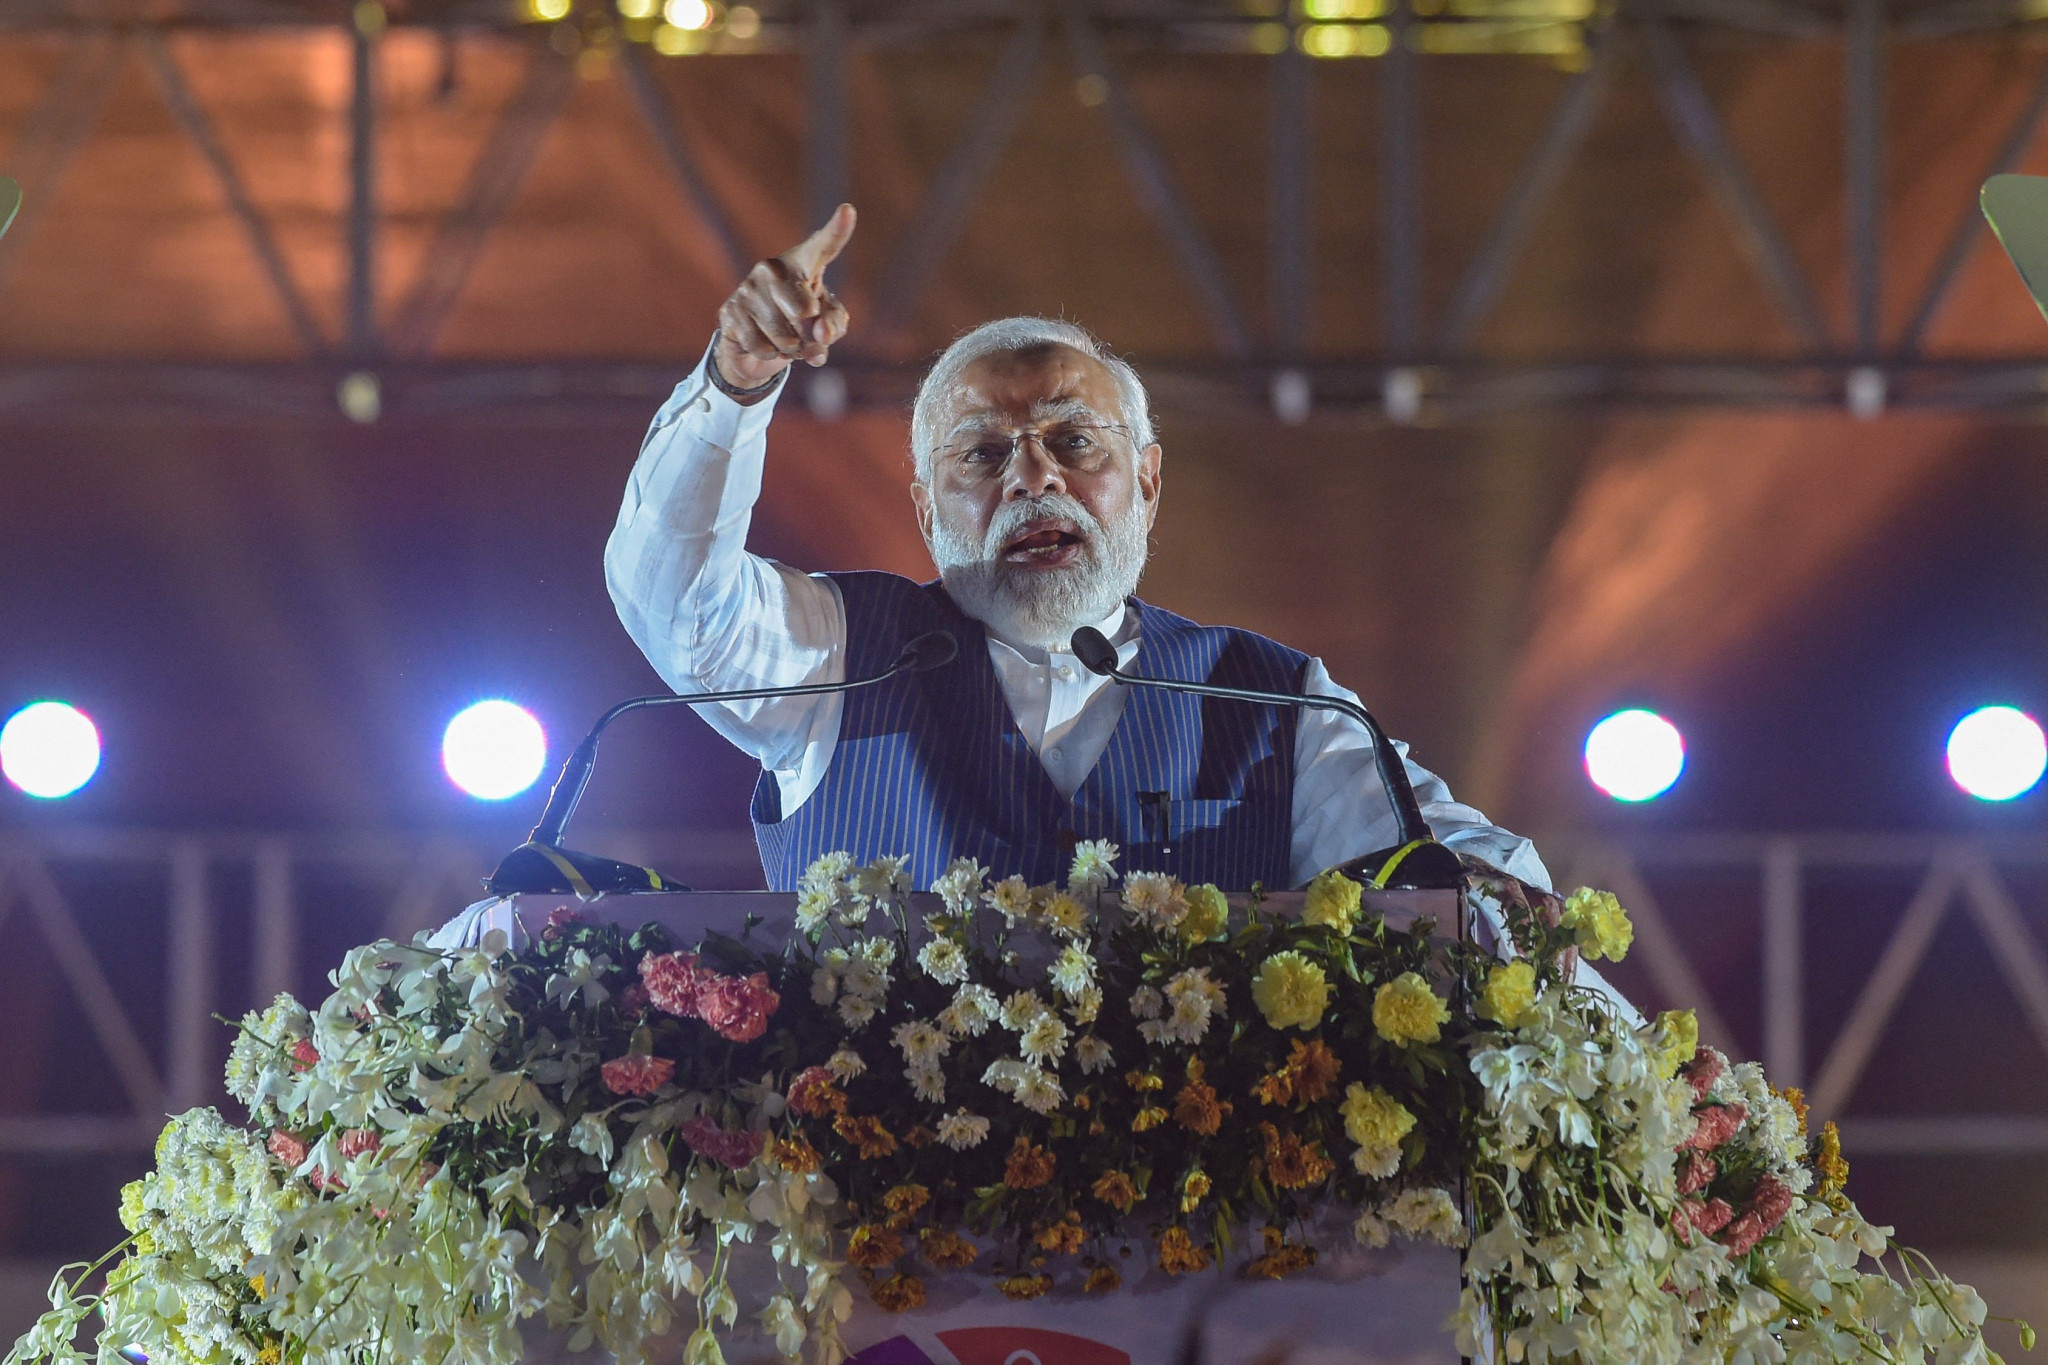 India's Prime Minister Narendra Modi has said the country is "ready" to host the 2036 Summer Olympics and Paralympics ©Getty Images